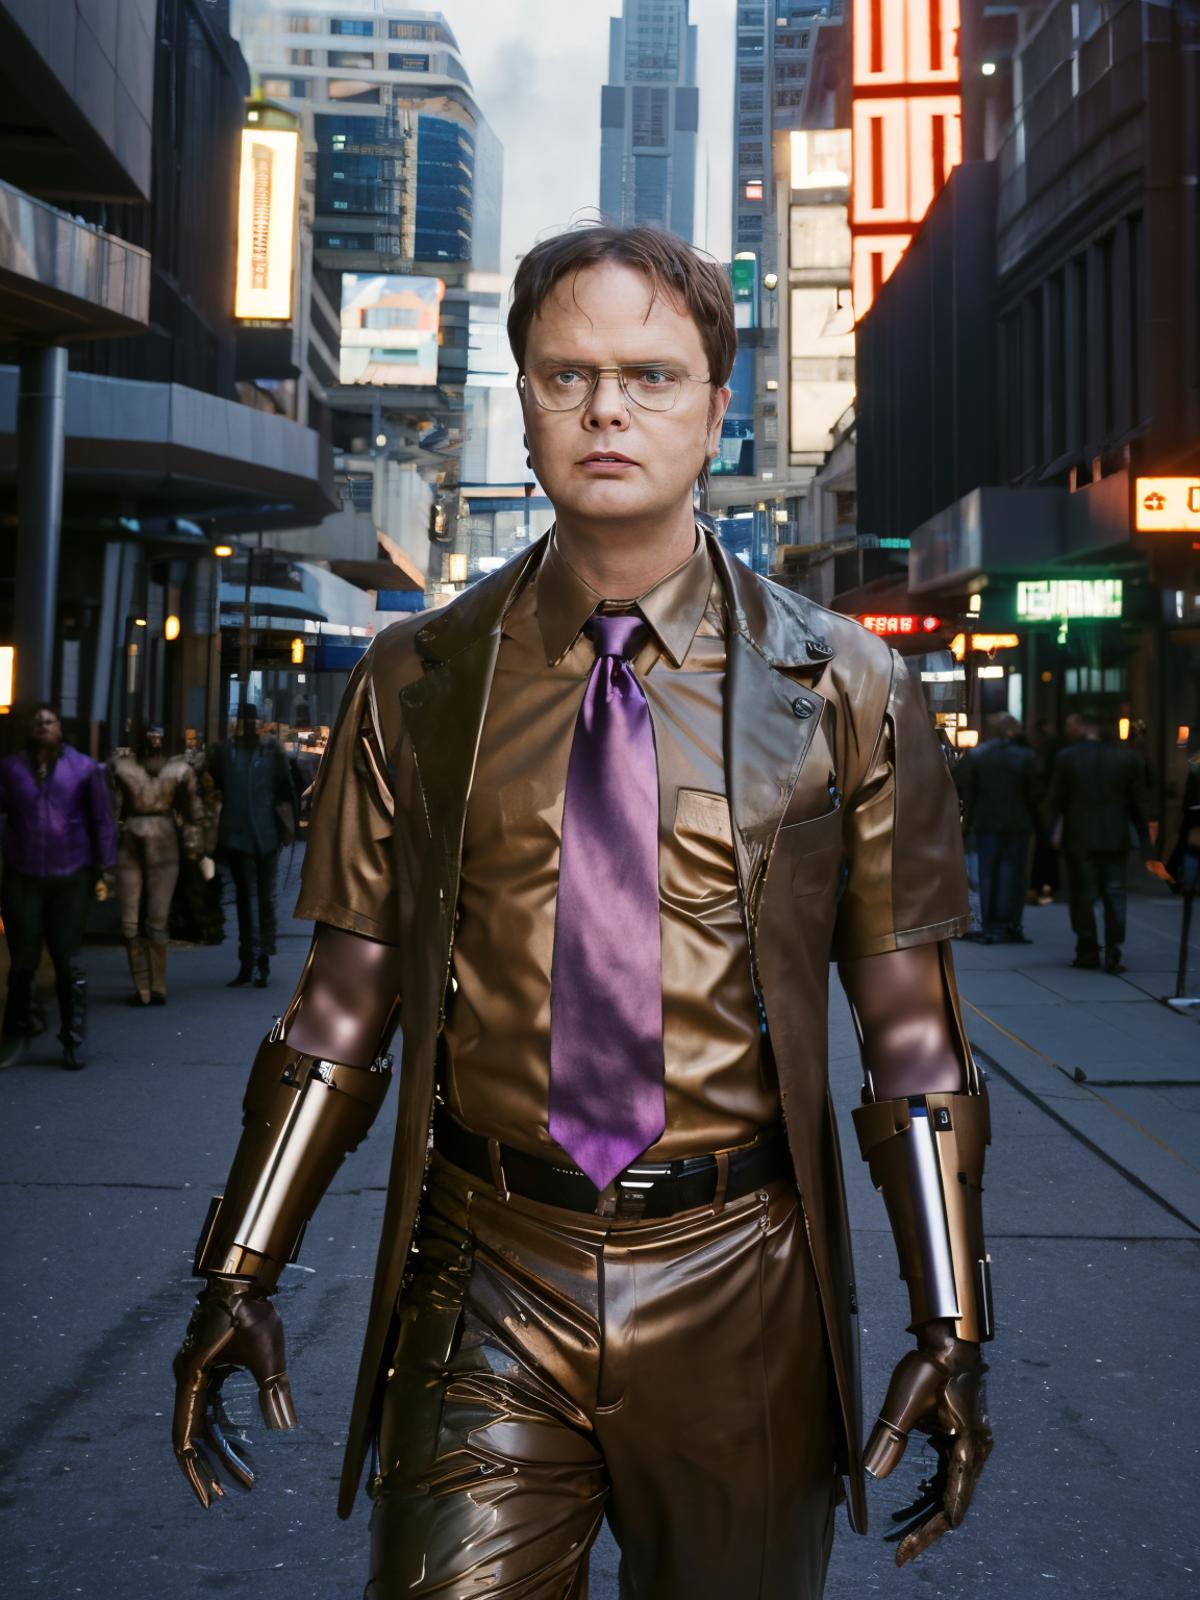 A man in a gold suit and tie standing on a city street.